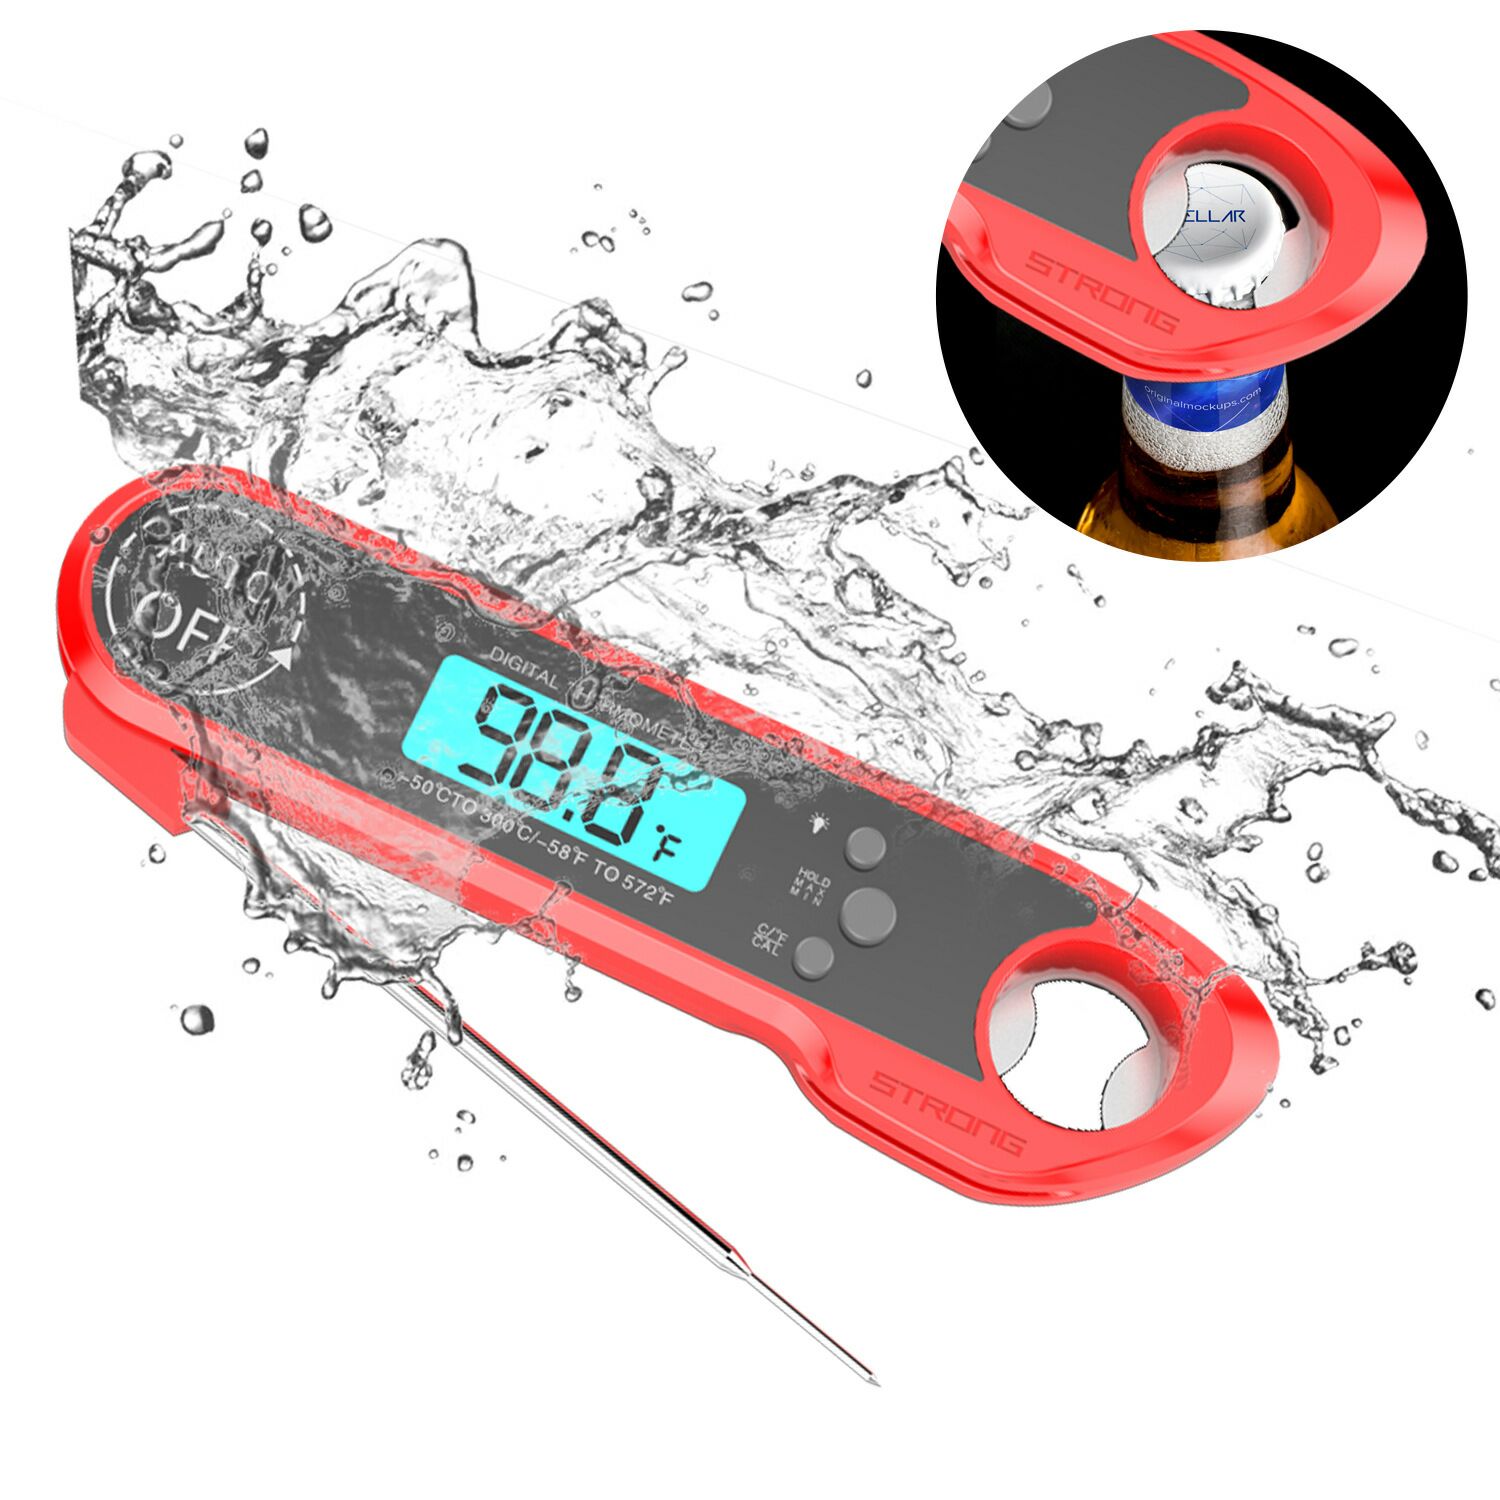 Waterproof Digital Instant Read Meat Thermometer with 4.6” Folding Probe Calibration Function for Cooking Food Candy, BBQ Grill, Smokers